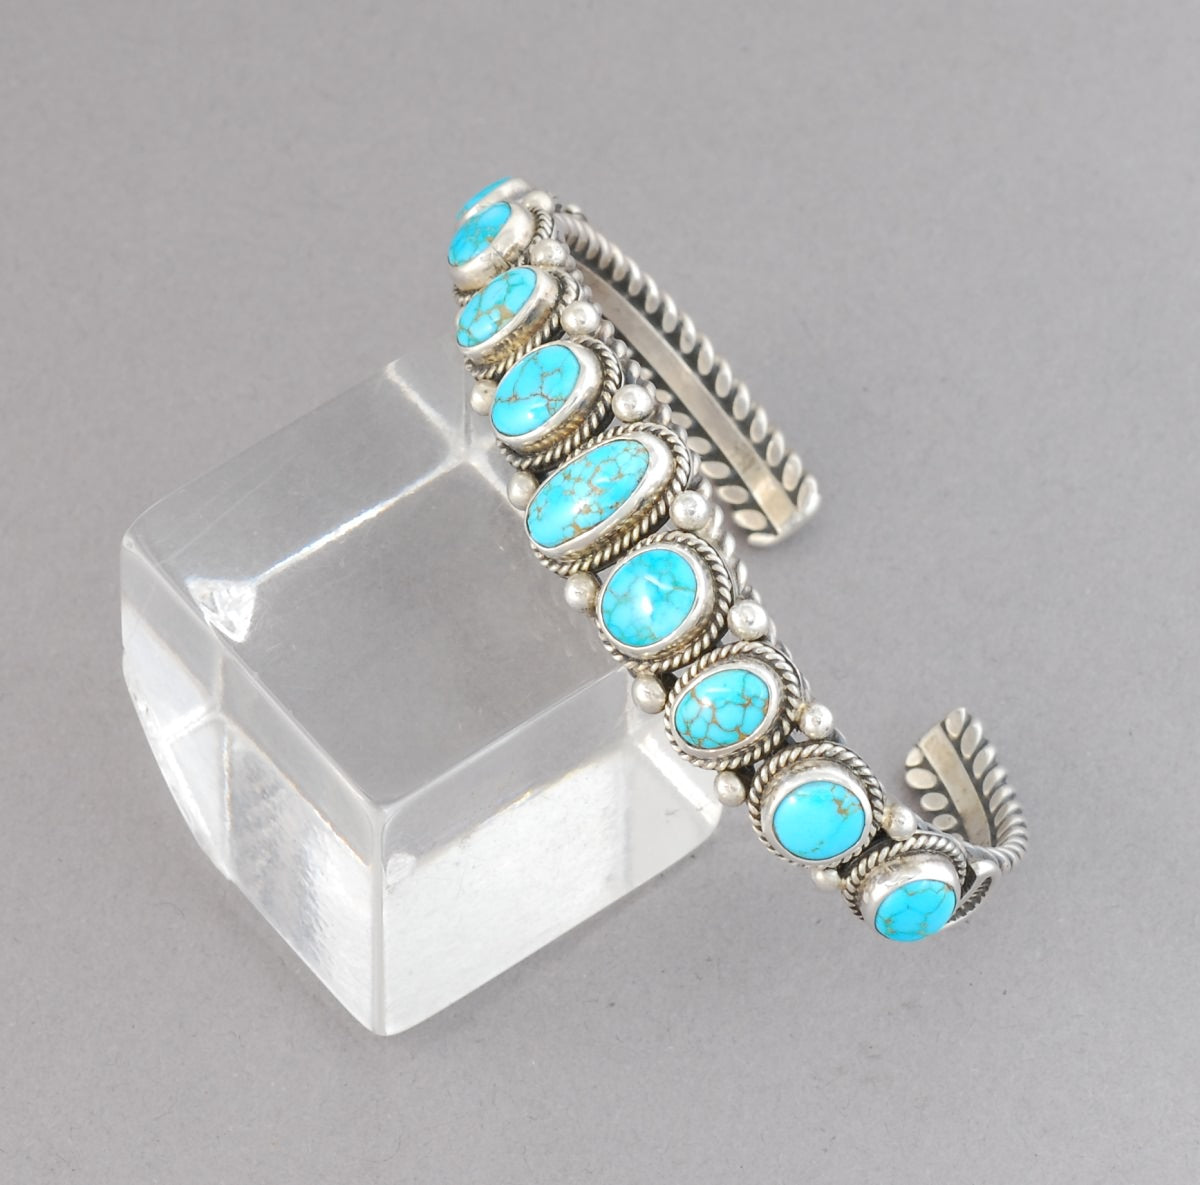 Cuff Bracelet with Hi Grade #8 Turquoise by Albert Jake